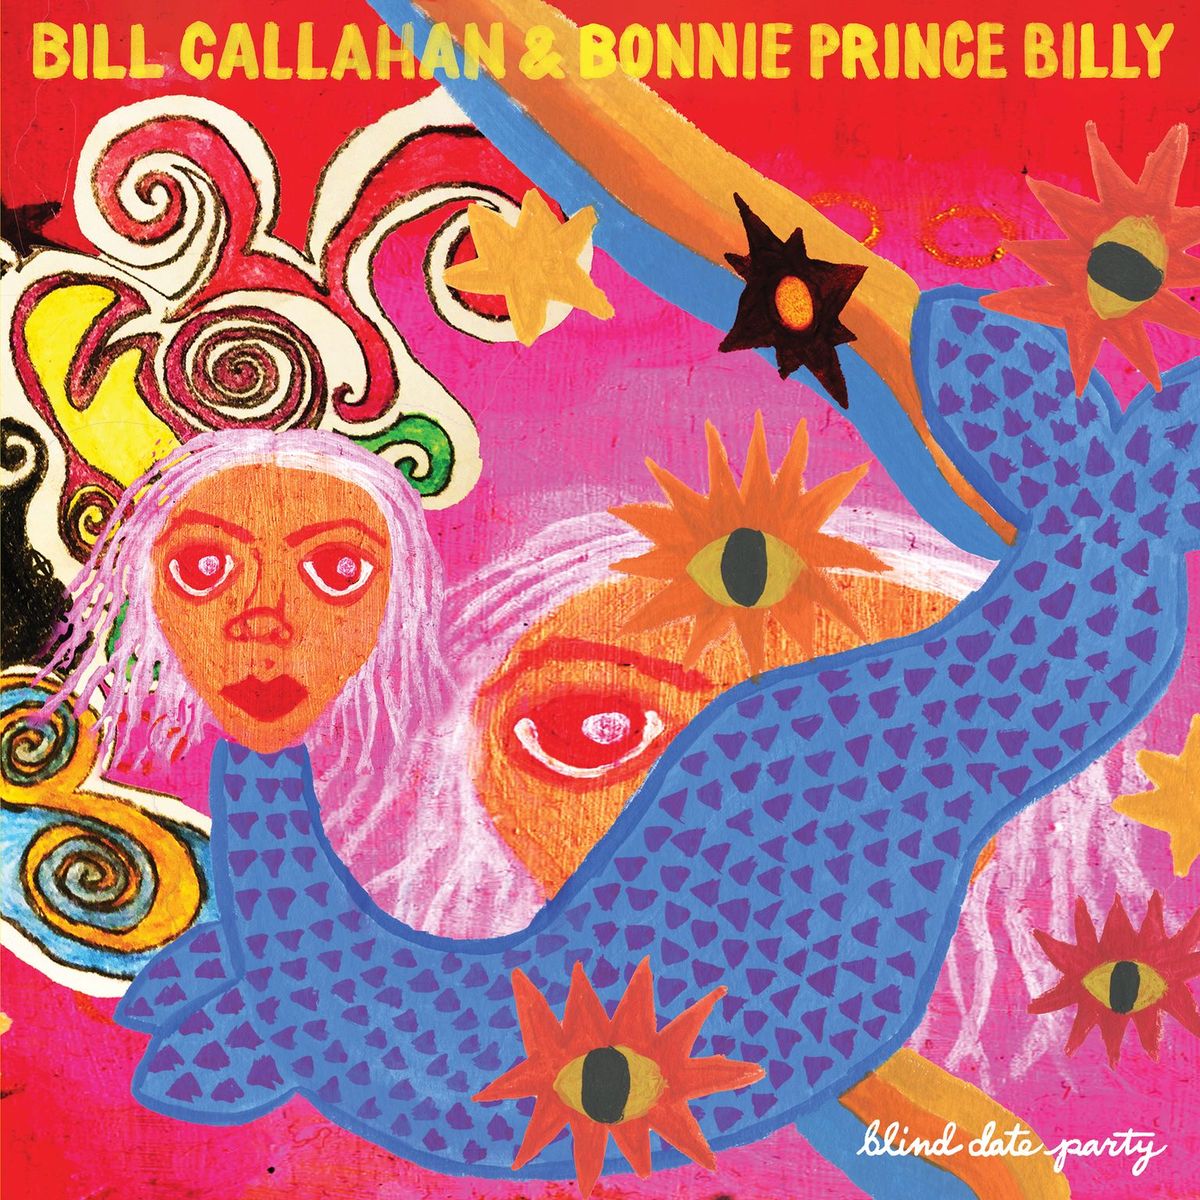 Bill Callahan & Bonnie 'Prince' Billy "Blind Date Party" 2LP